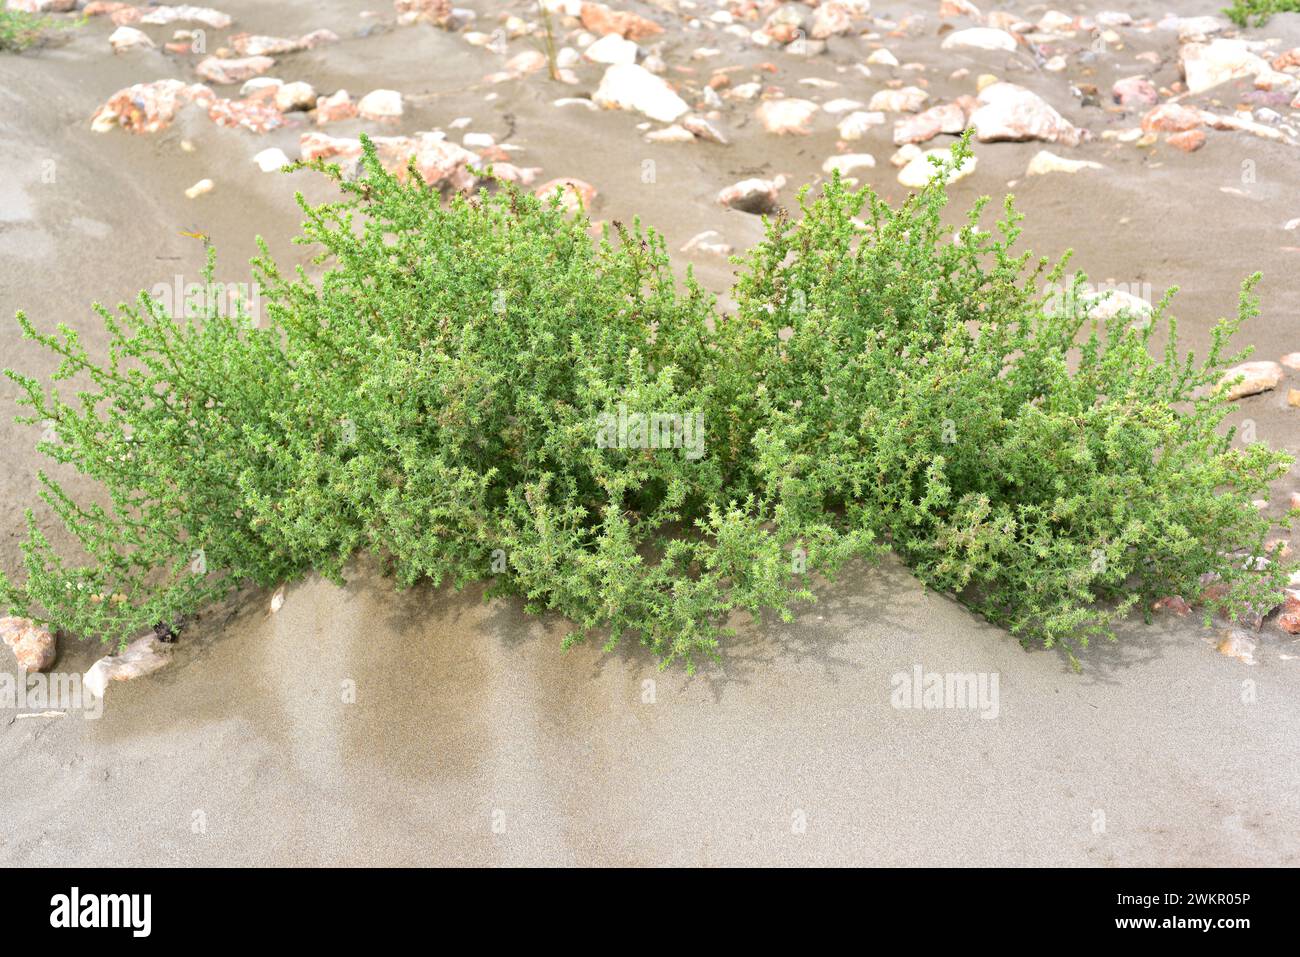 Prickly glasswort or prickly saltwort (Salsola kali or Kali turgidum) is an annual plant native to coast dunes to Eurasia and northern Africa. This ph Stock Photo